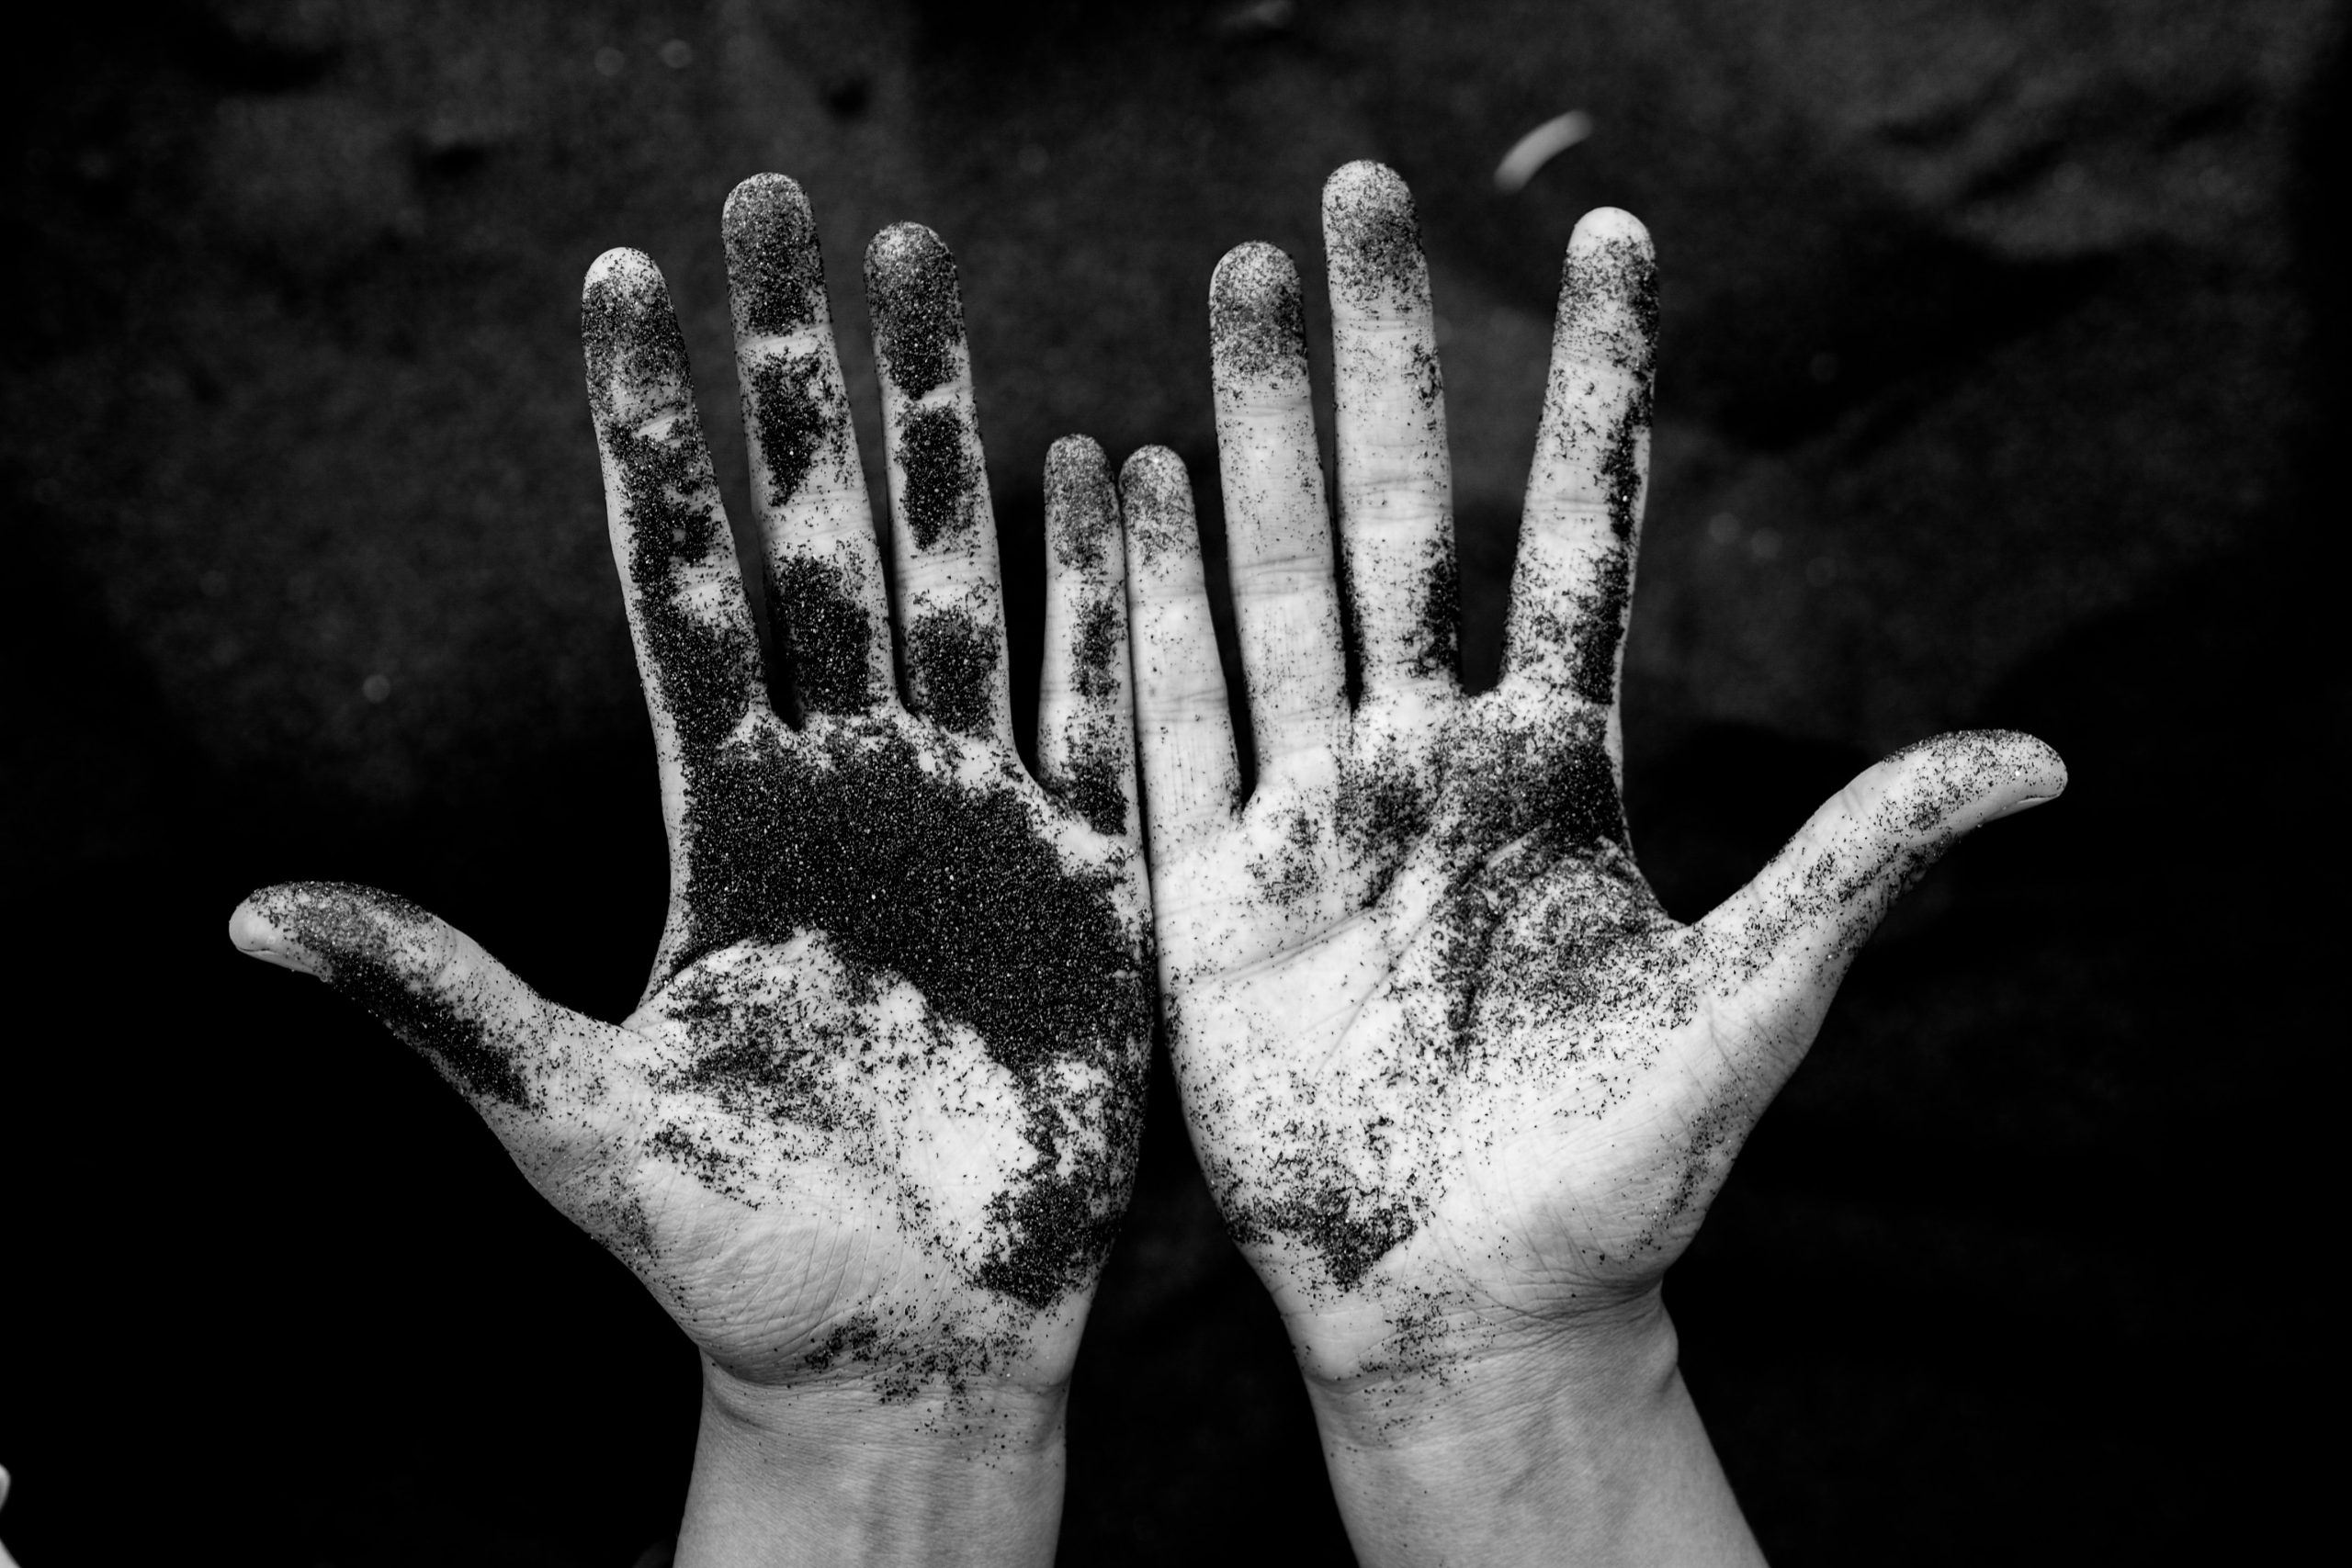 black-and-white photo of hands covered in ashes